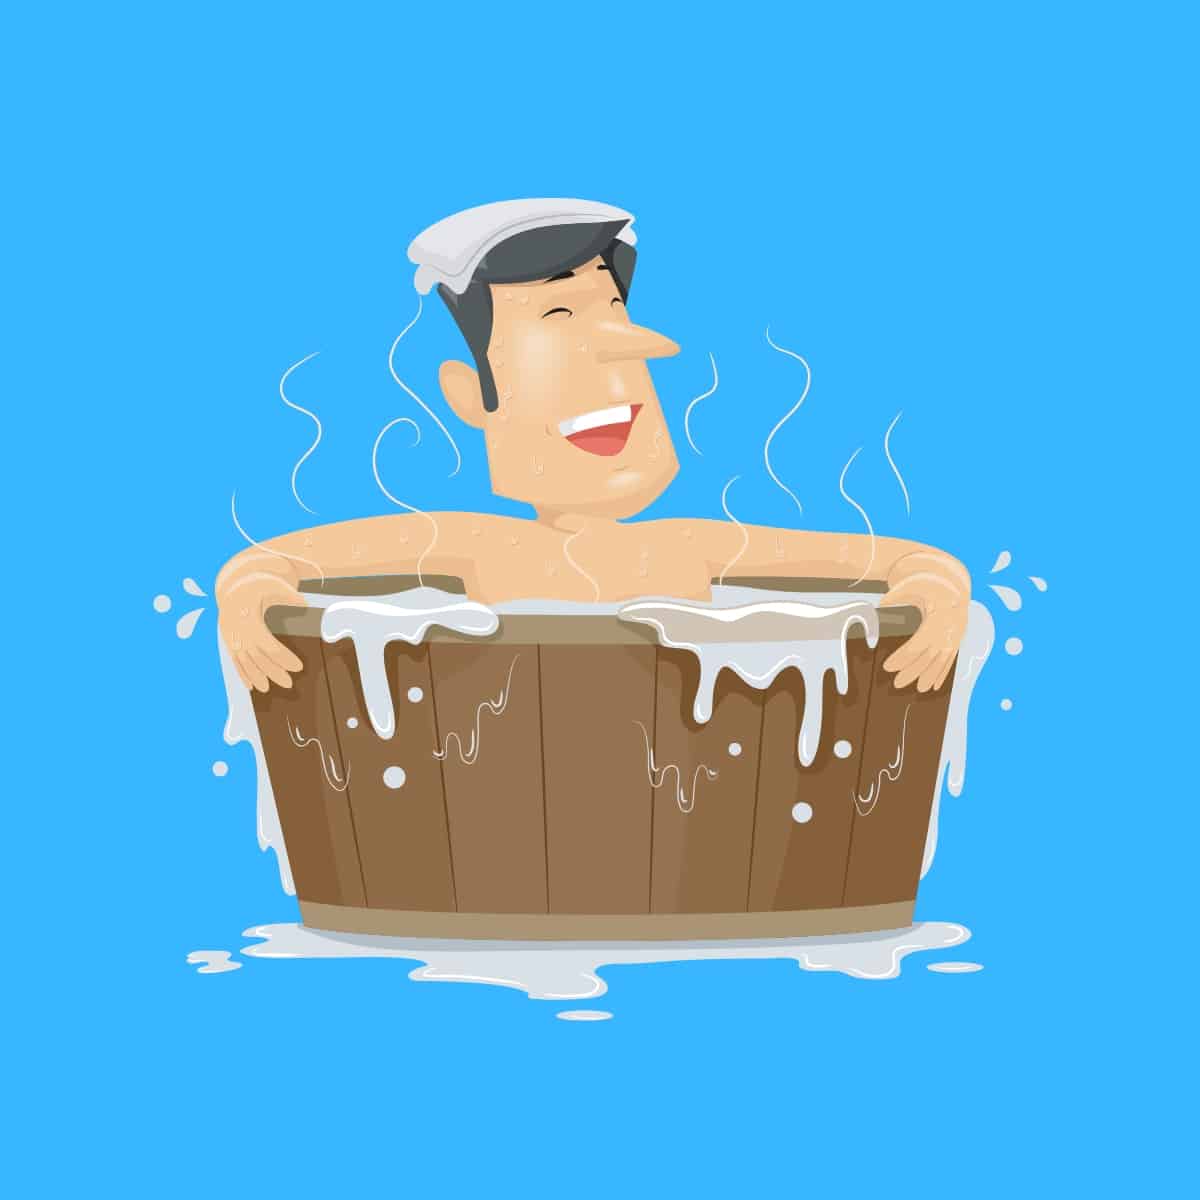 Cartoon graphic of a man in a steaming hot tub on a blue background.